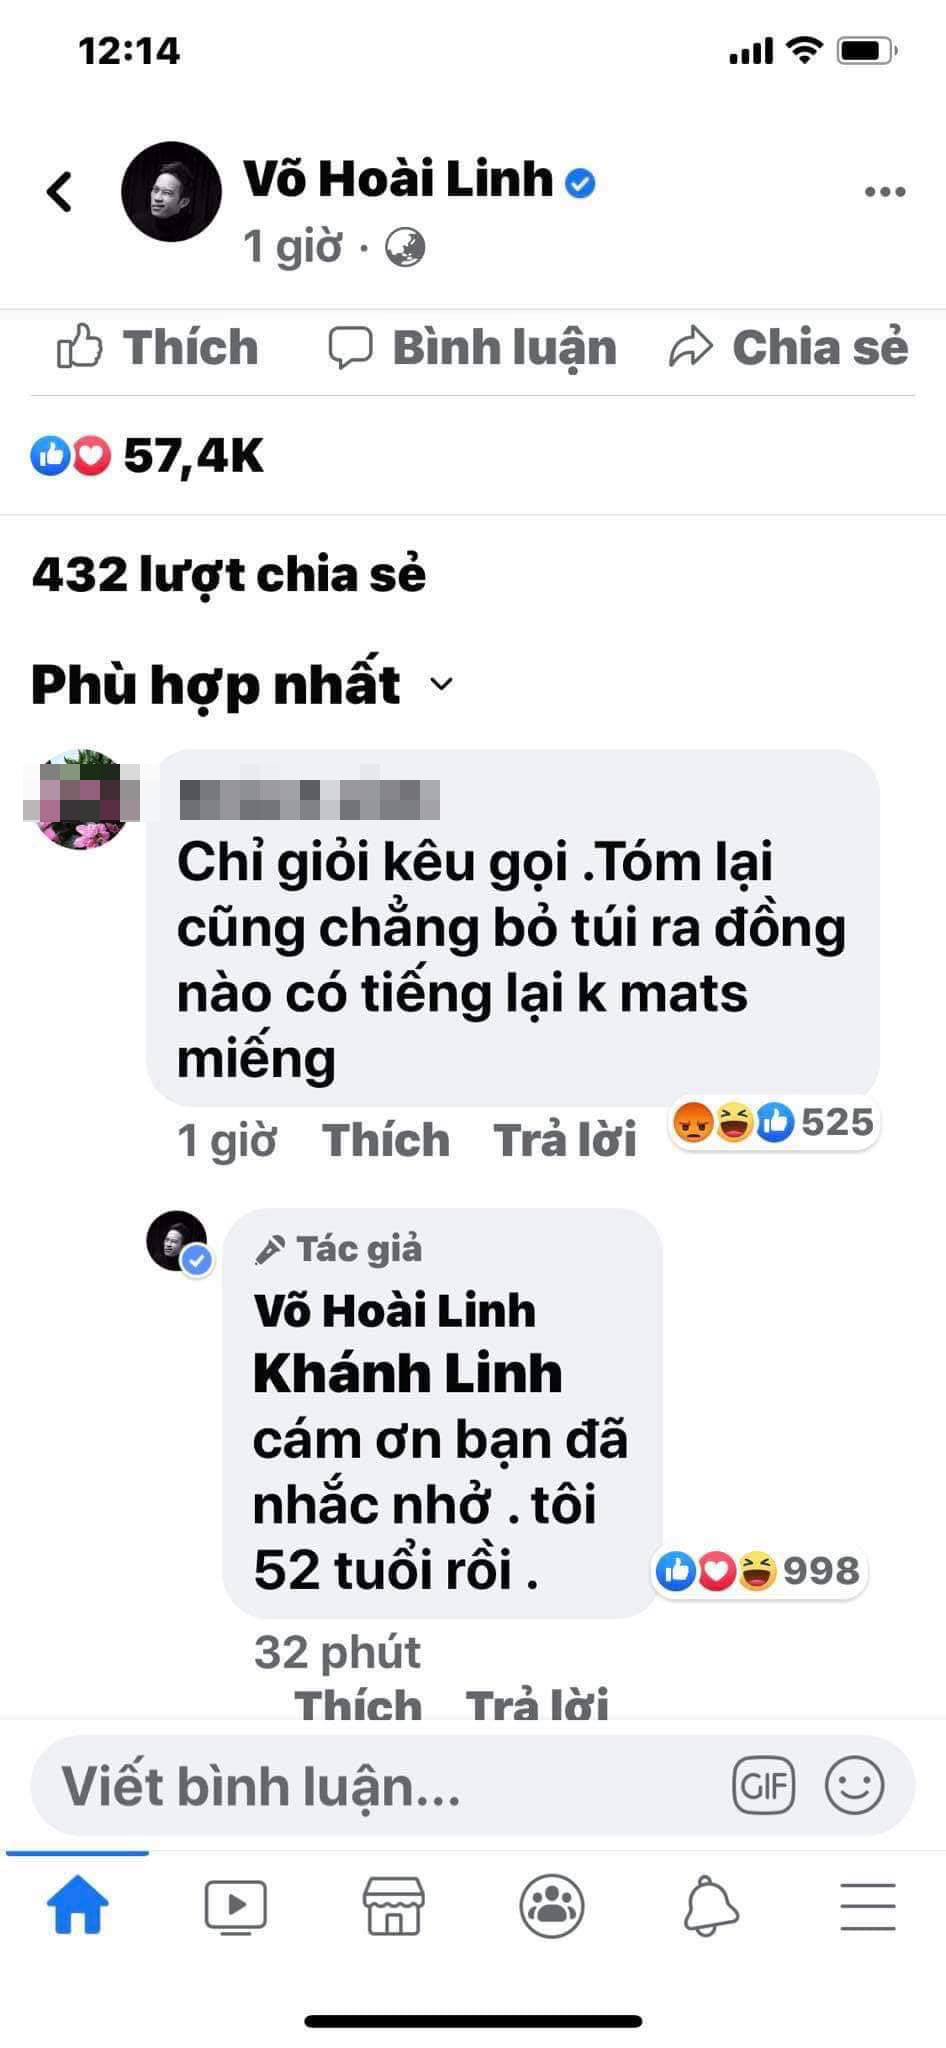 Hoai Linh Was Told That He Could Only Call Well He Couldn T Afford To Save Central Vietnam And The Reaction Was Profound